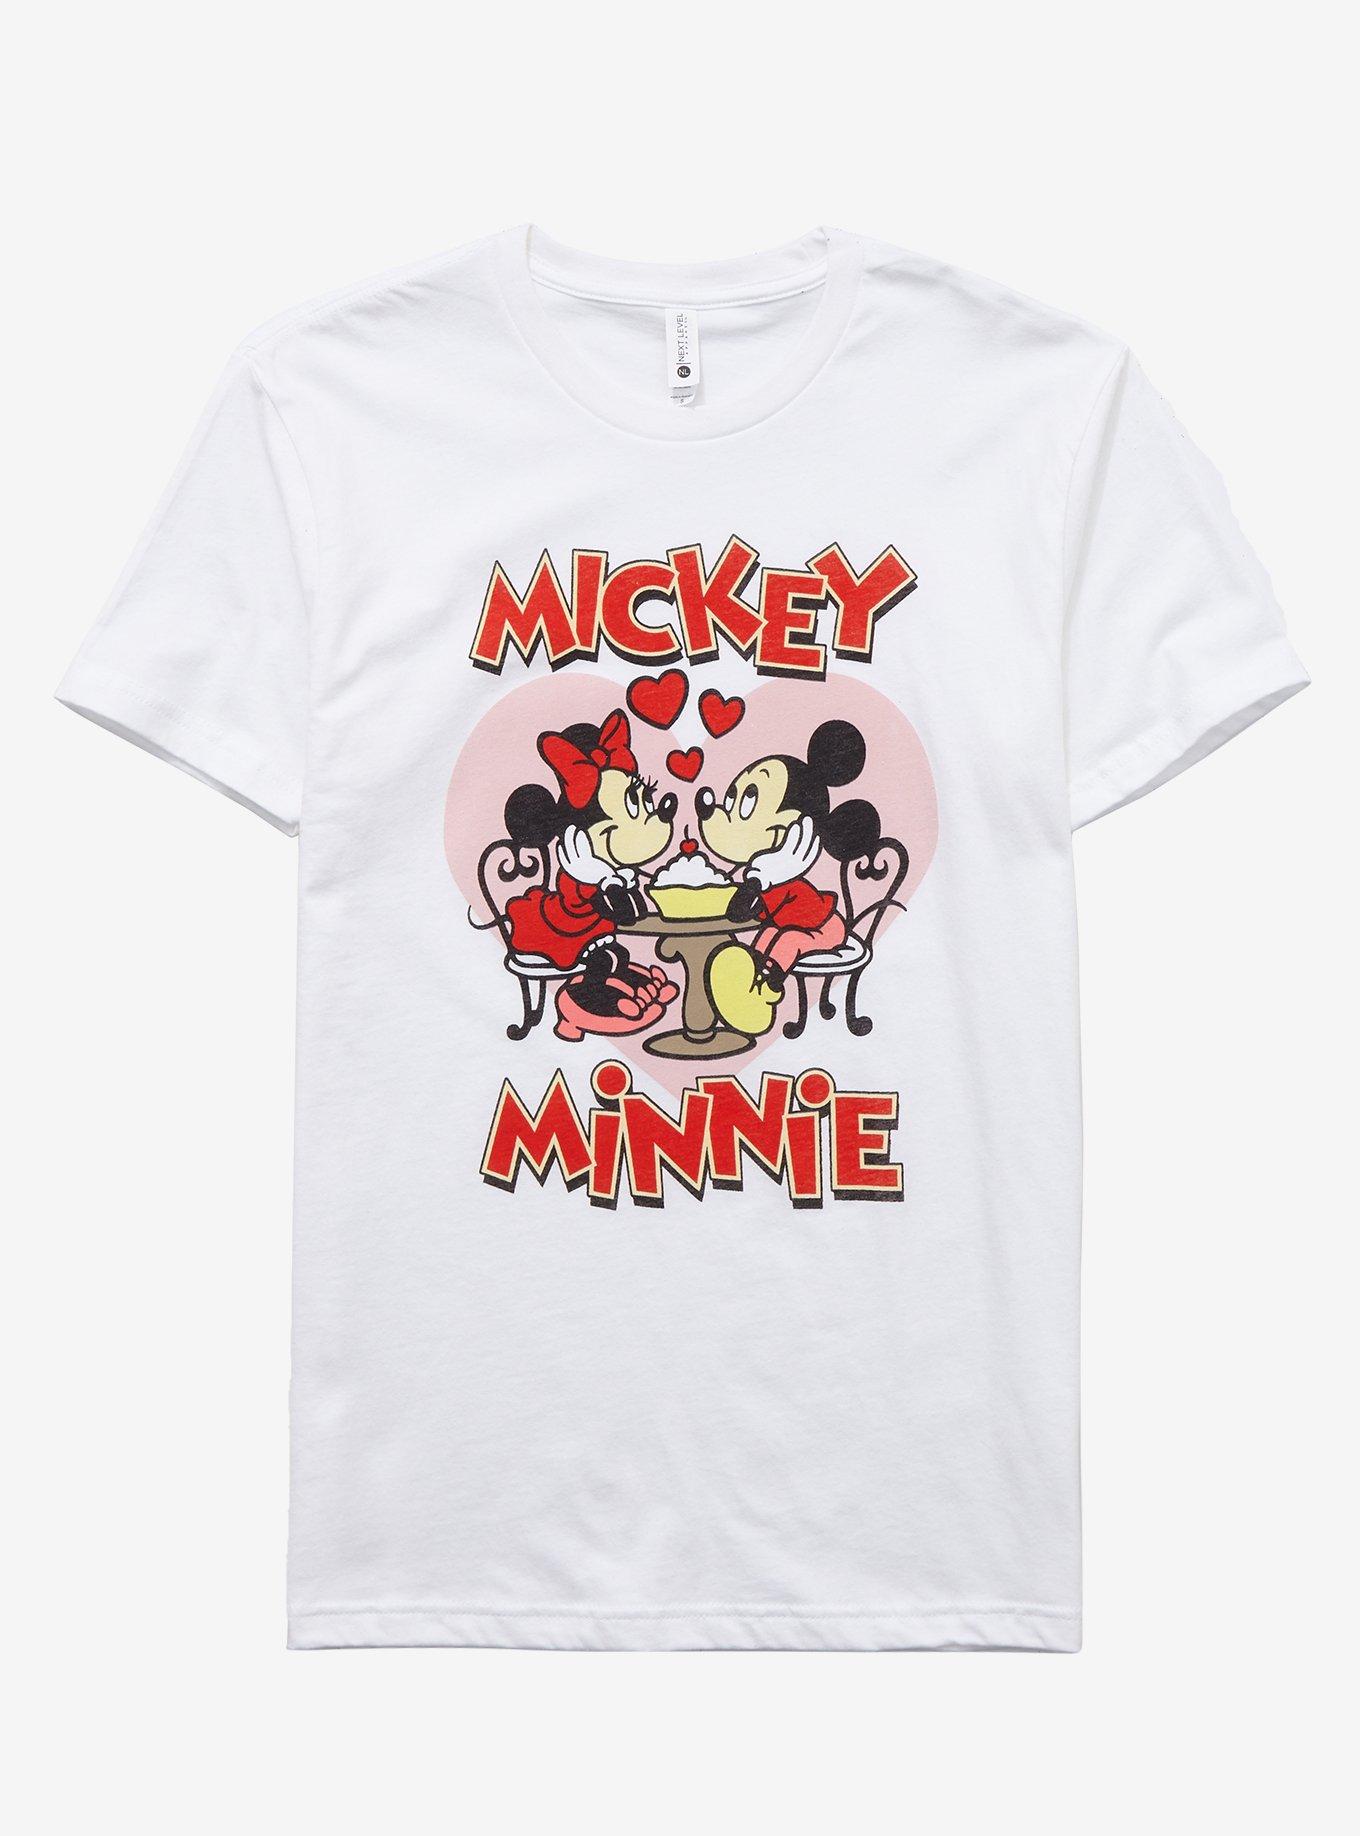 Boy's Disney Mickey Mouse Heart T-Shirt - Red - Large